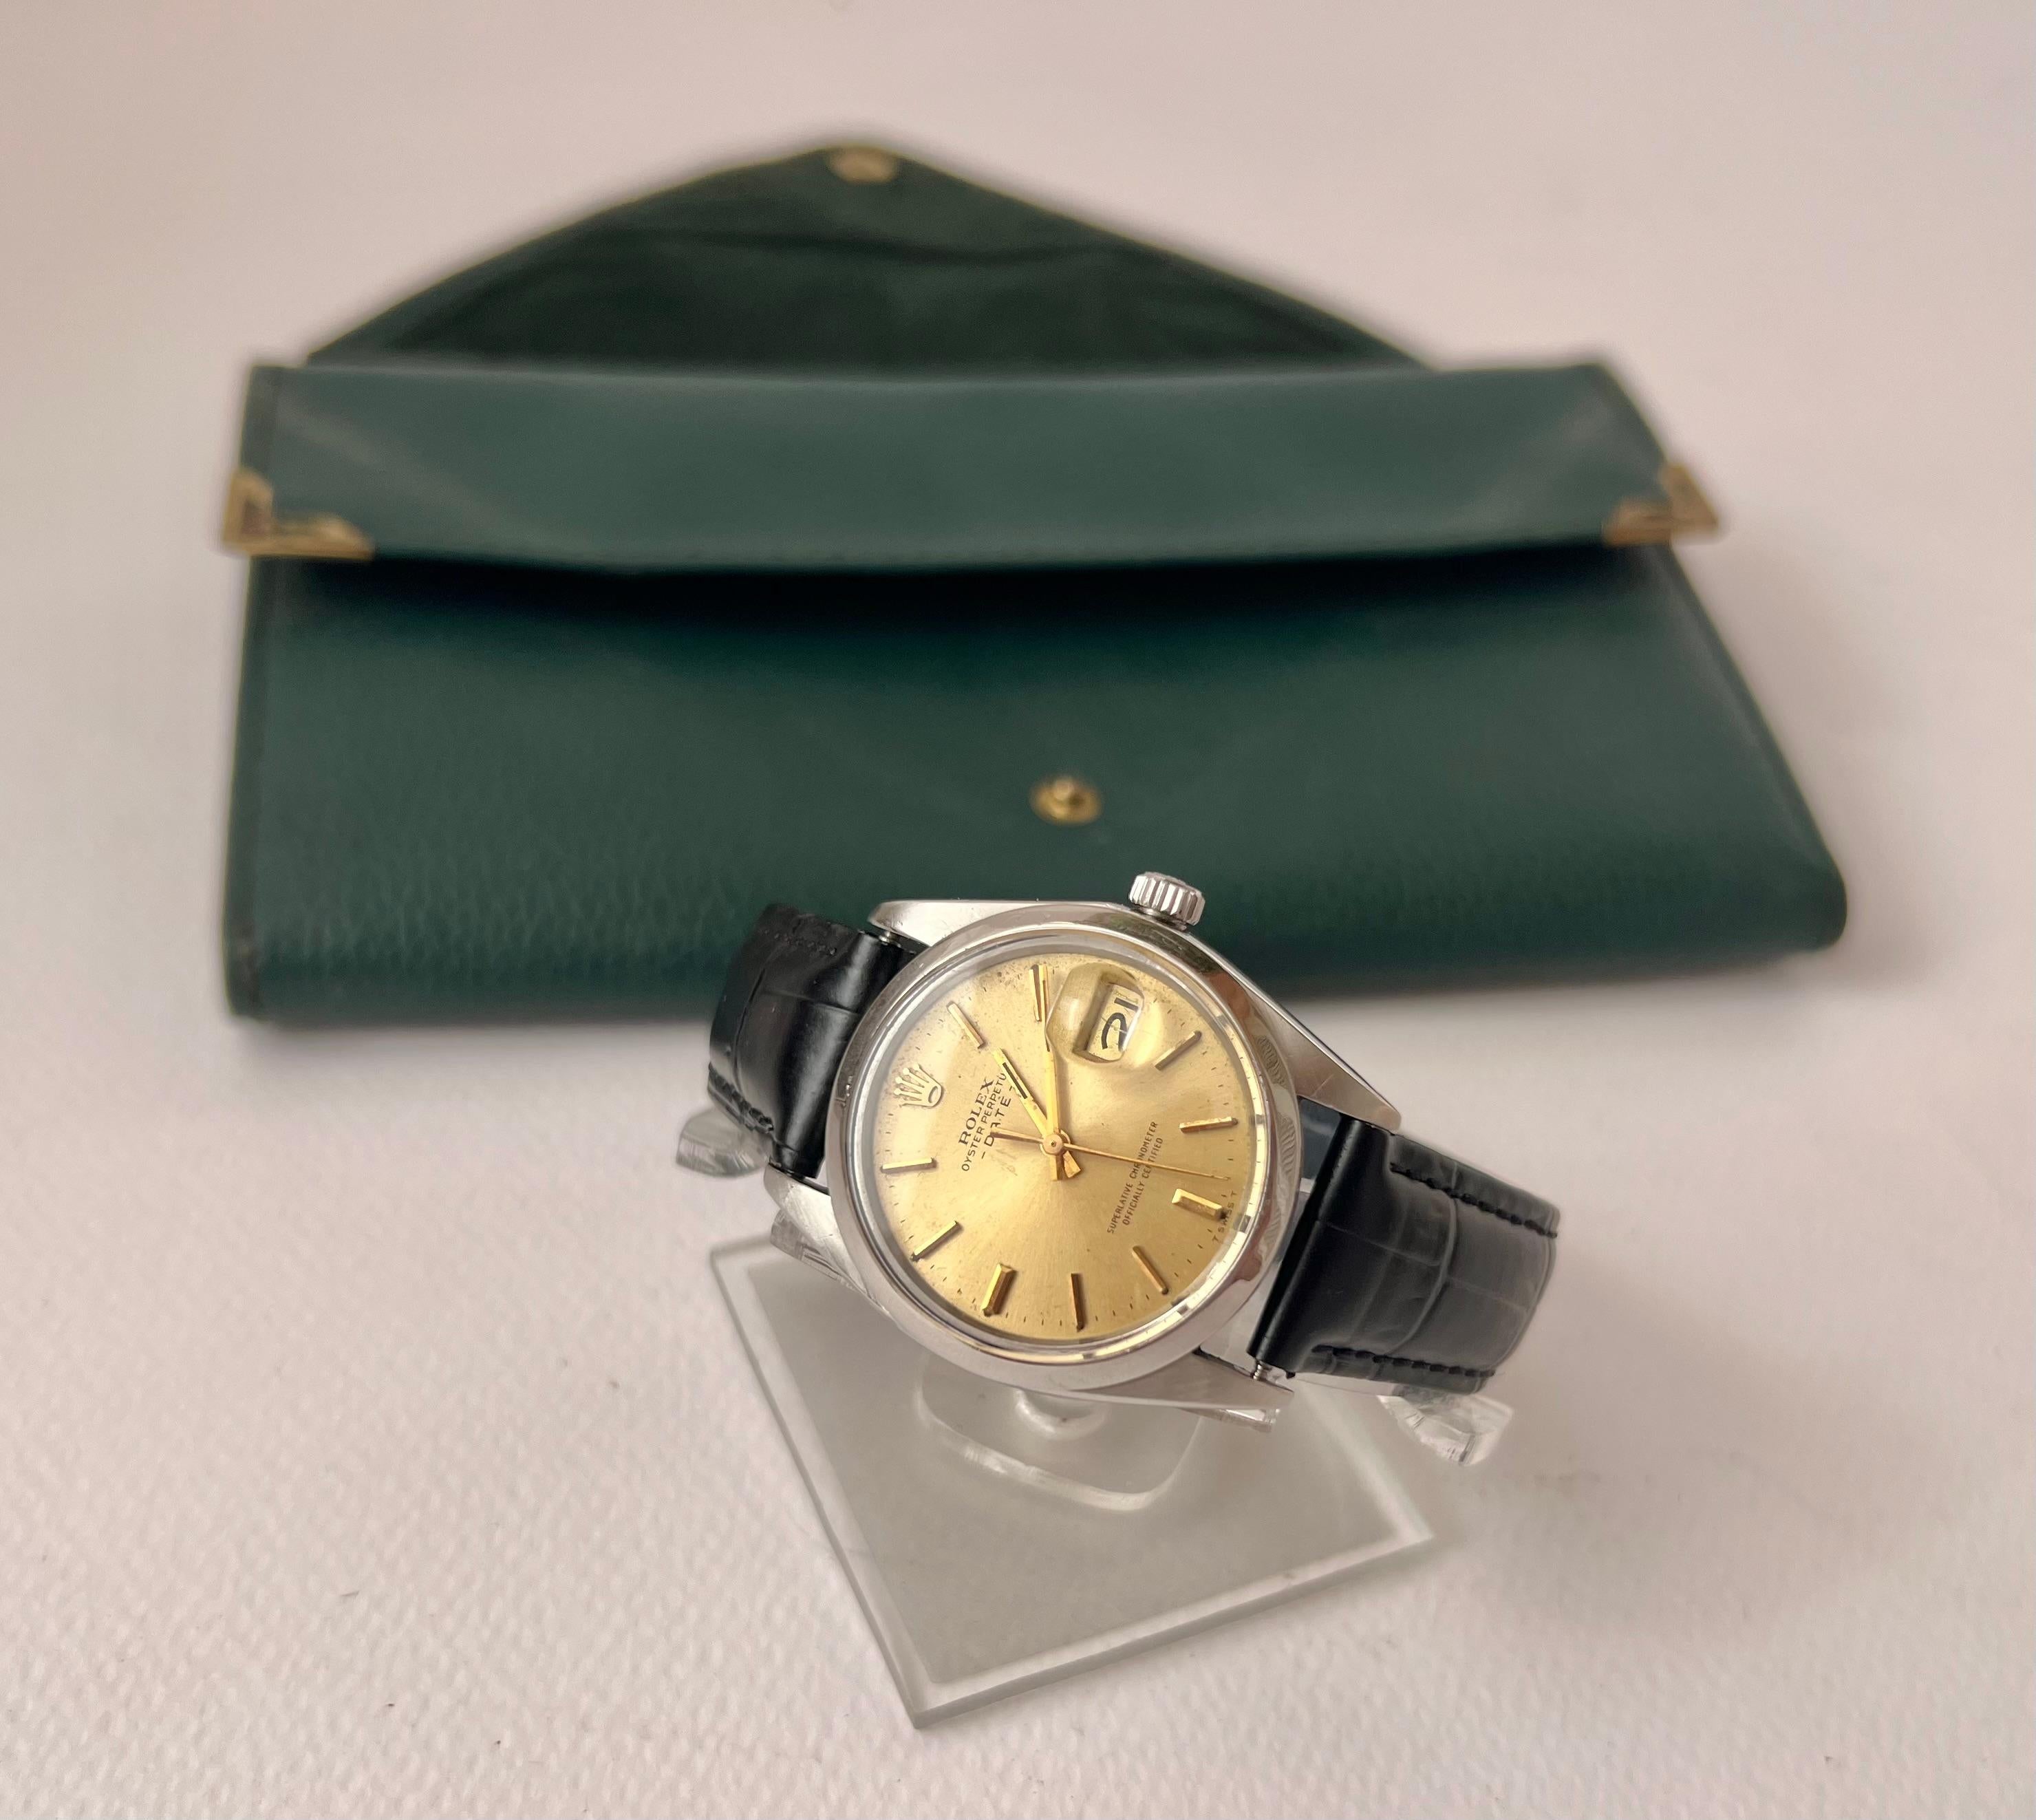 Brand : Rolex

Model:  Oyster Perpetual Date 

Reference Number :   1500

Features :  Screw down Crown - Champagne Dial 

Country Of Manufacture: Switzerland

Movement: Automatic

Case Material:  Steel 

Measurements : 34mm diameter (excluding crown